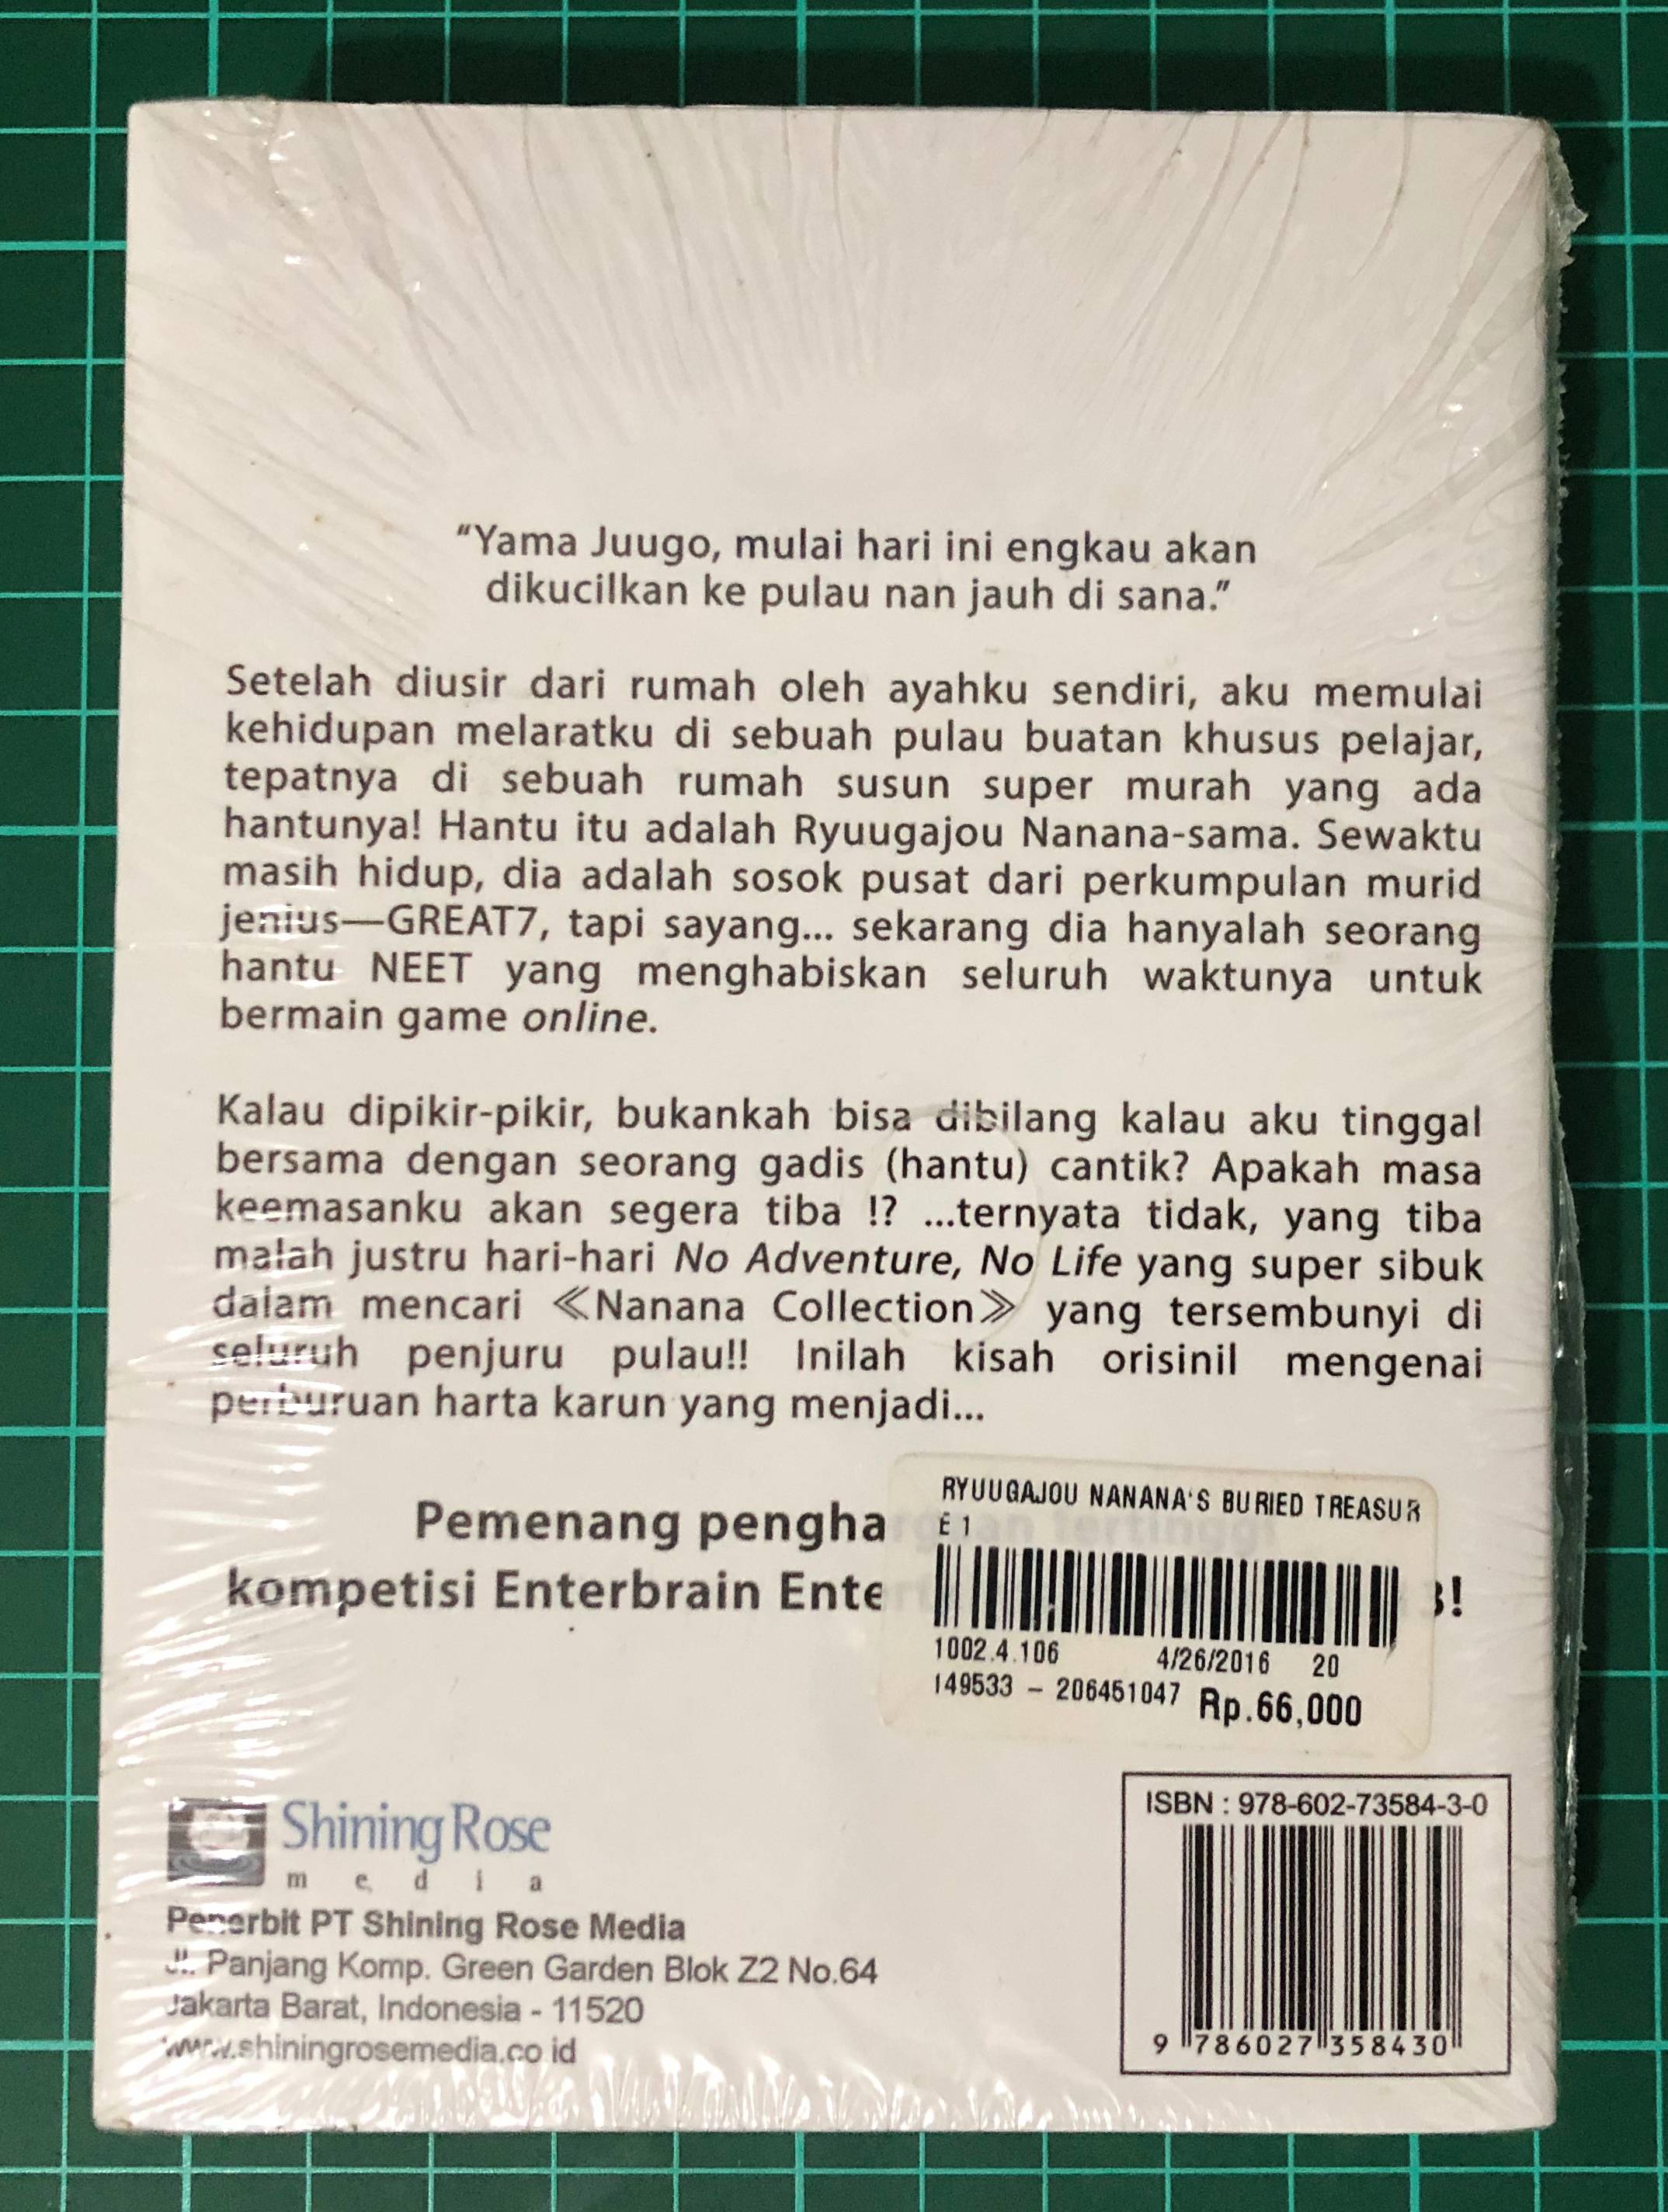 Back side of &ldquo;Ryuugajou Nanana&rsquo;s Buried Treasure&rdquo;.
Yes, it&rsquo;s still sealed. Even the price tag is still there.
Yes, I&rsquo;ve read it before (English version though).